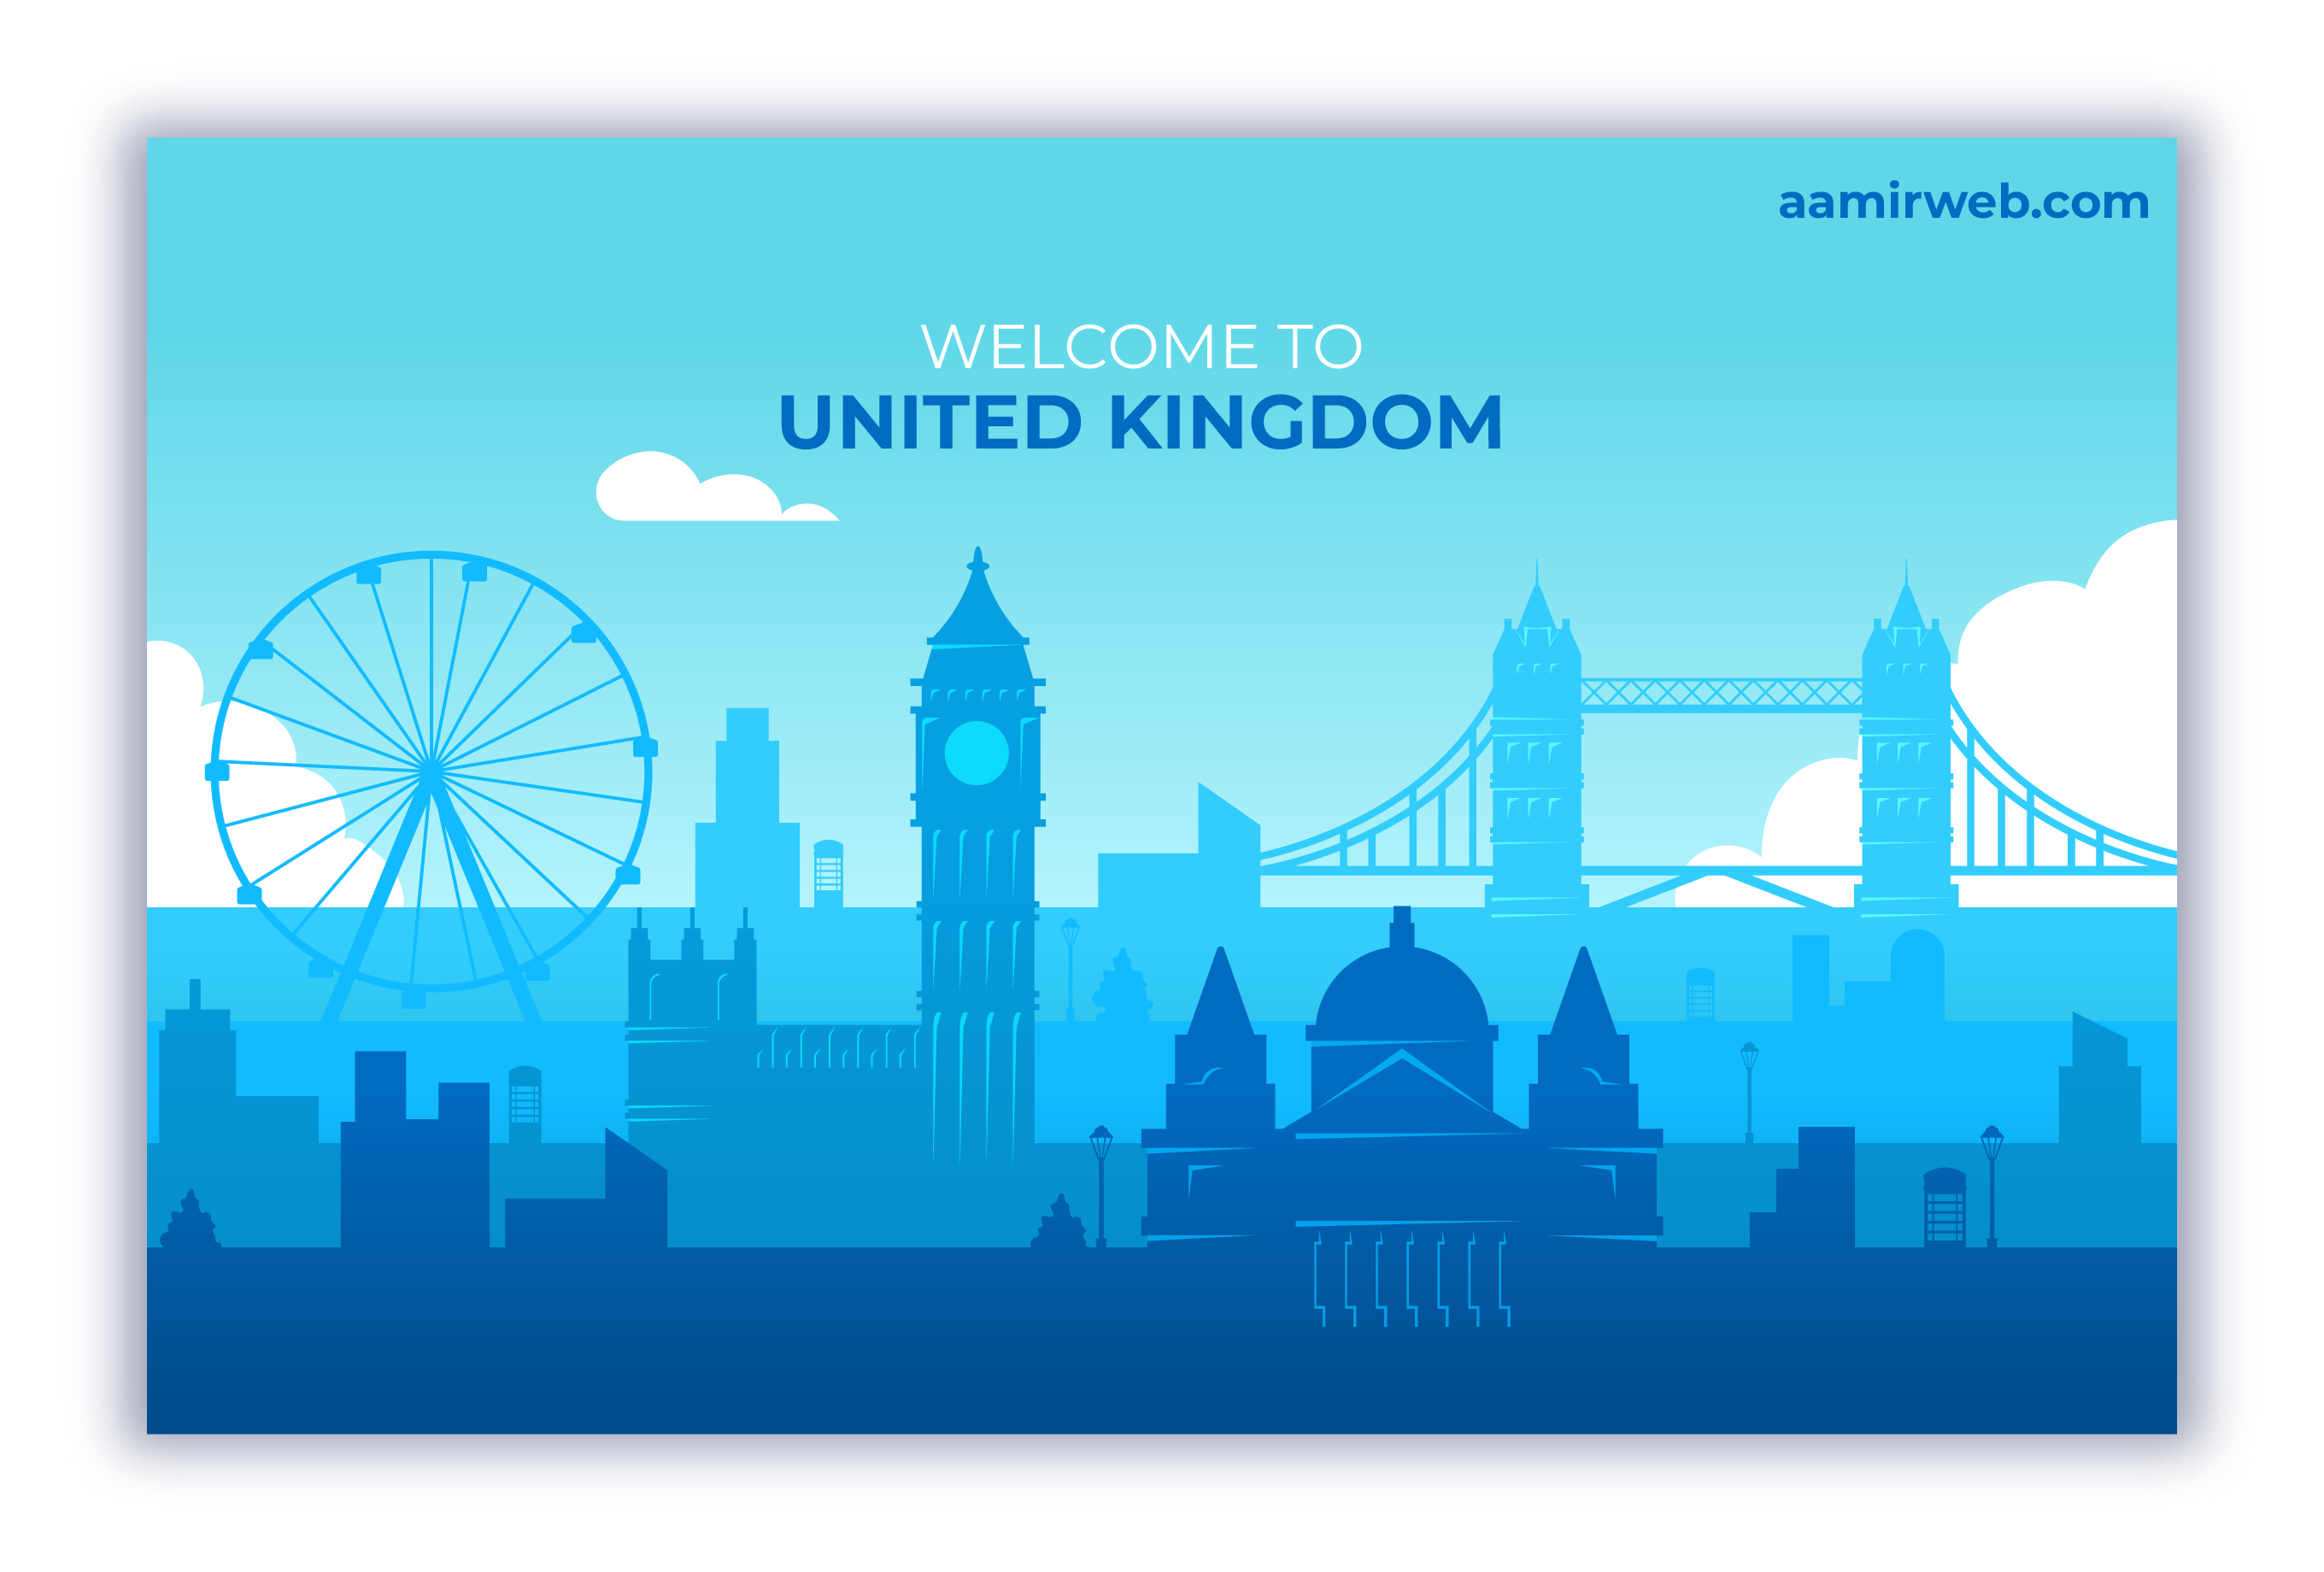 Travel to United kingdom 100 cities